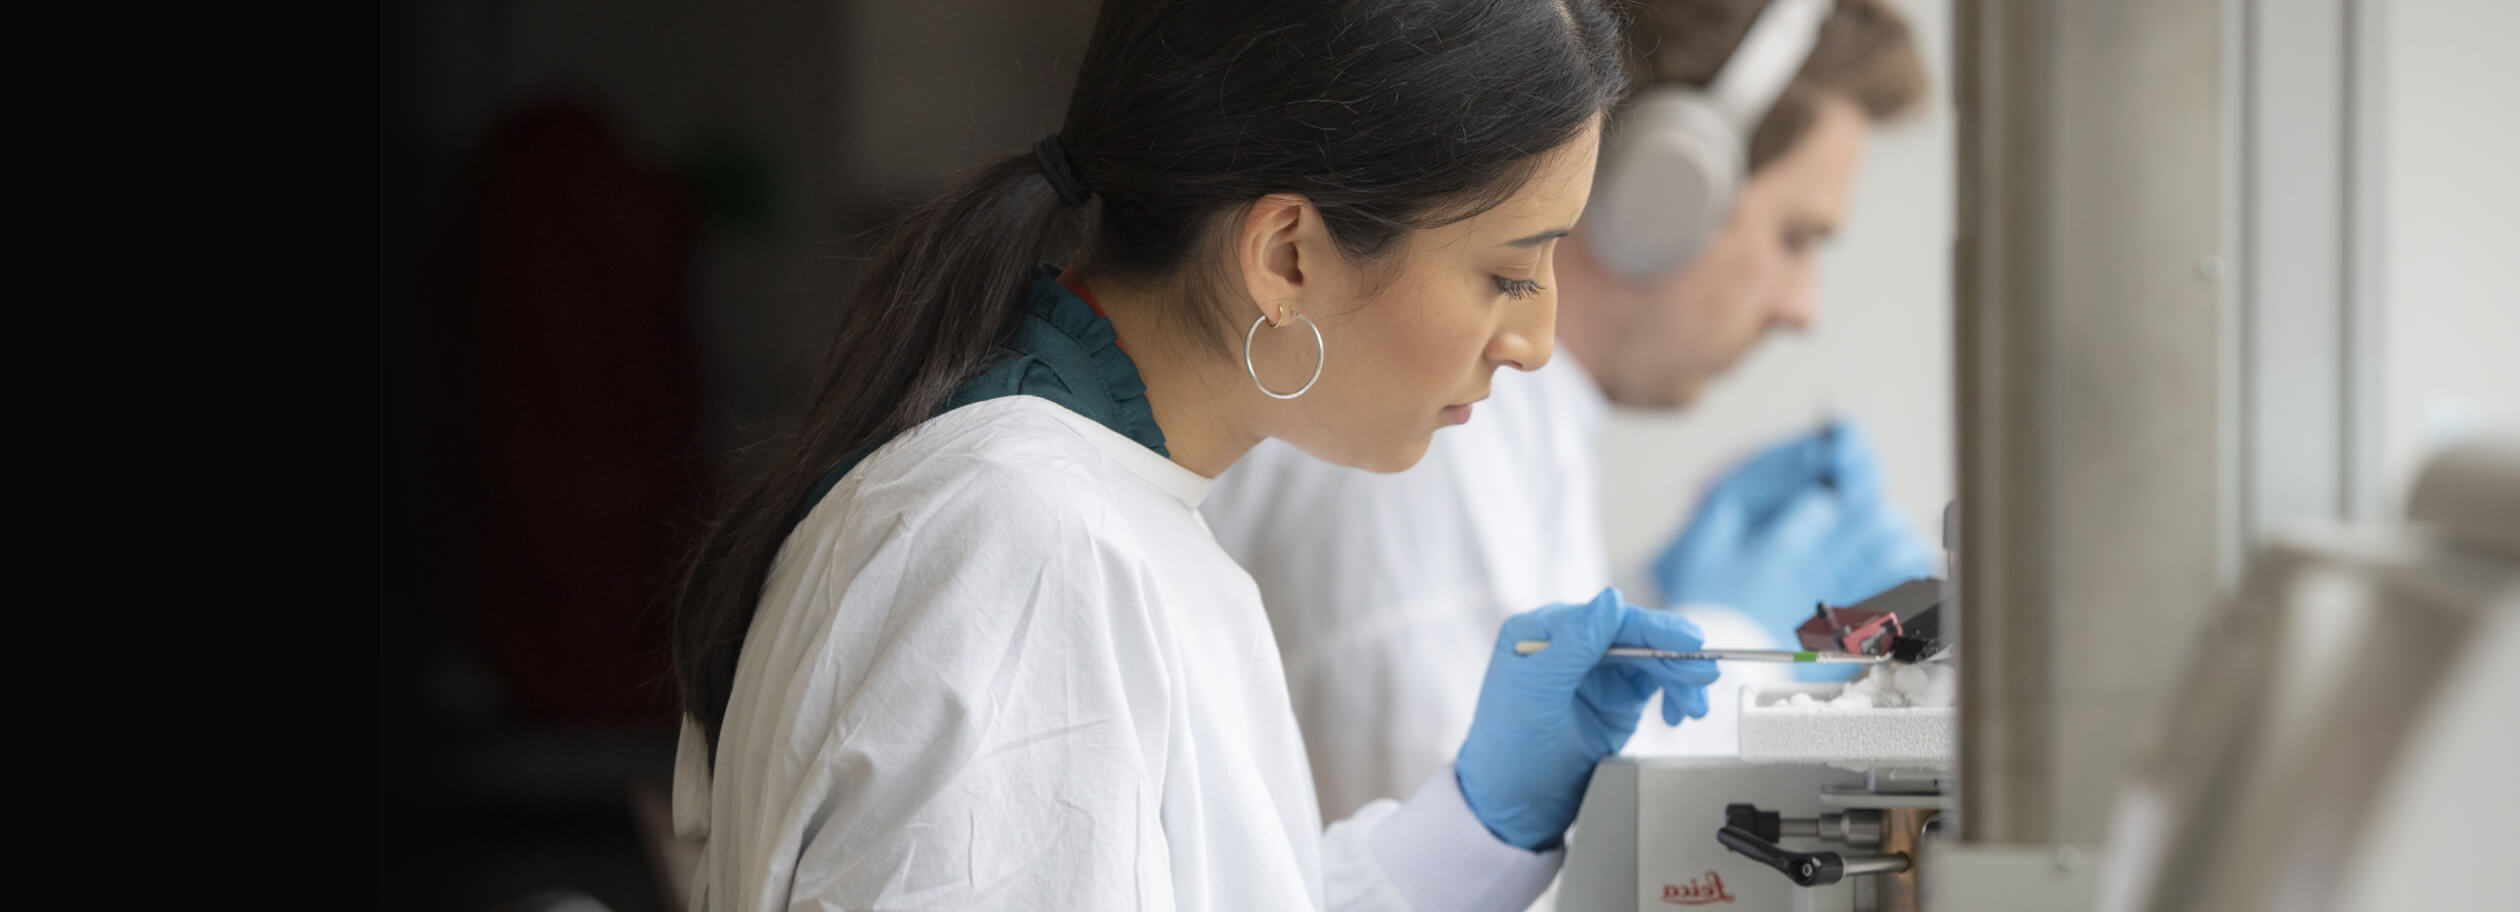 Image shows a female scientist with a white lab coat working in a lab